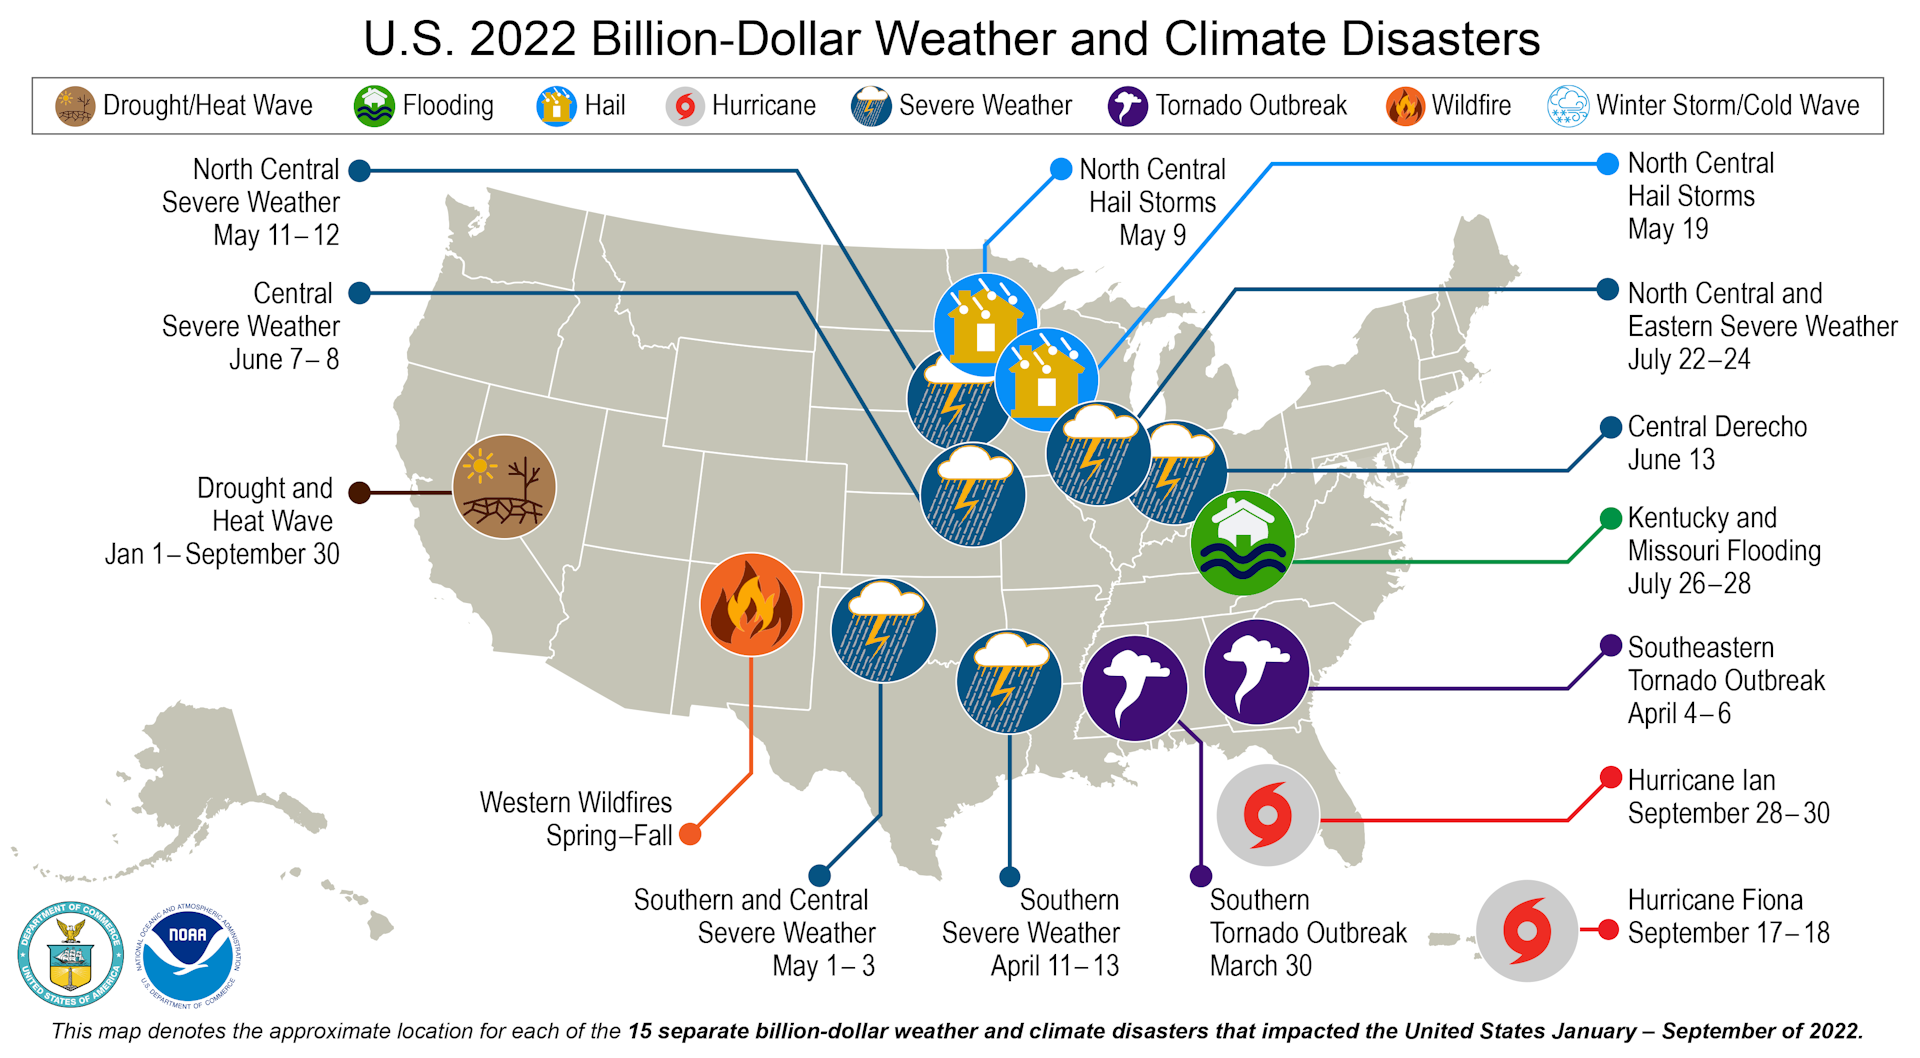 Map showing locations of droughts, heat waves, hail storms and other billion-dollar weather and climate disasters.